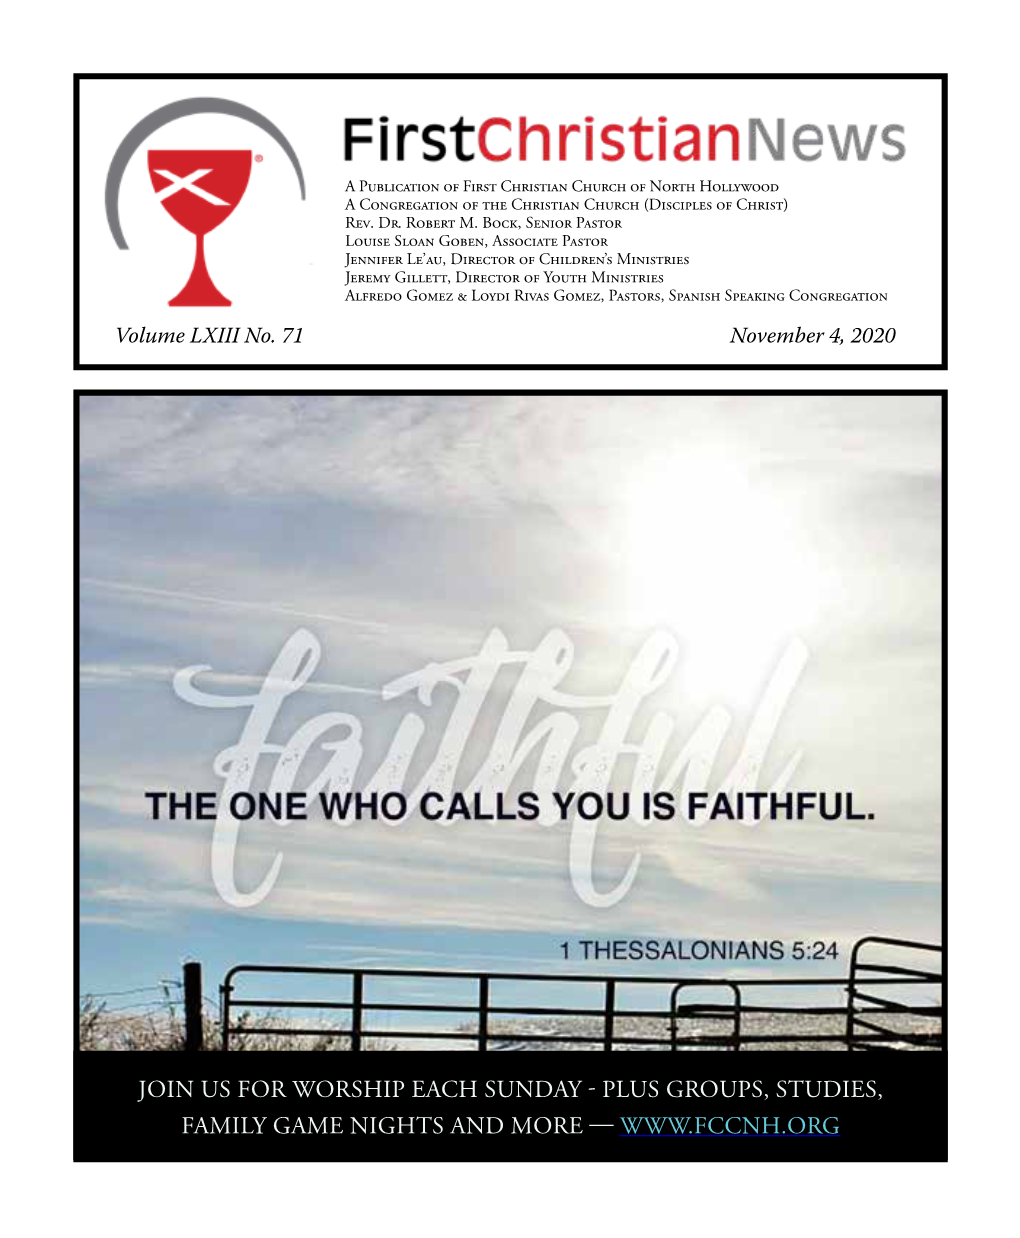 JOIN US for WORSHIP EACH SUNDAY - PLUS GROUPS, STUDIES, FAMILY GAME NIGHTS and MORE — Page 2 November 4, 2020 First Christian News